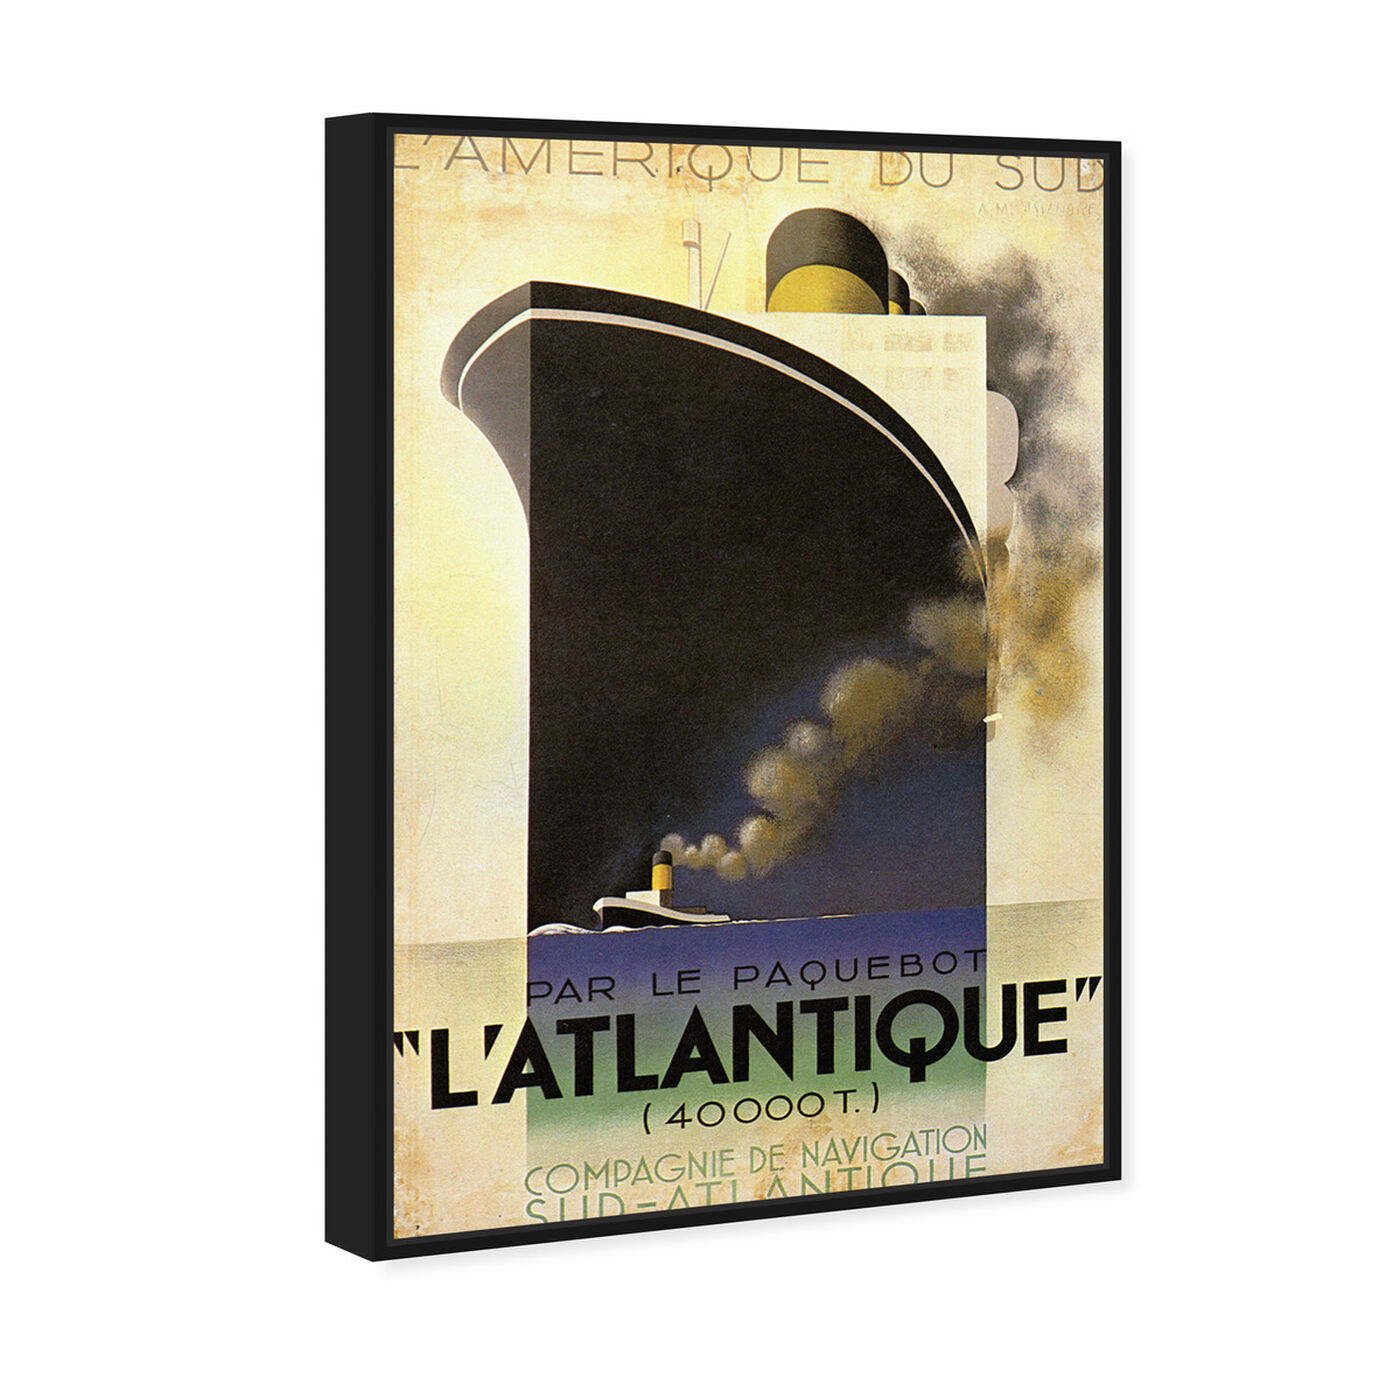 Angled view of Atlantique featuring advertising and posters art.